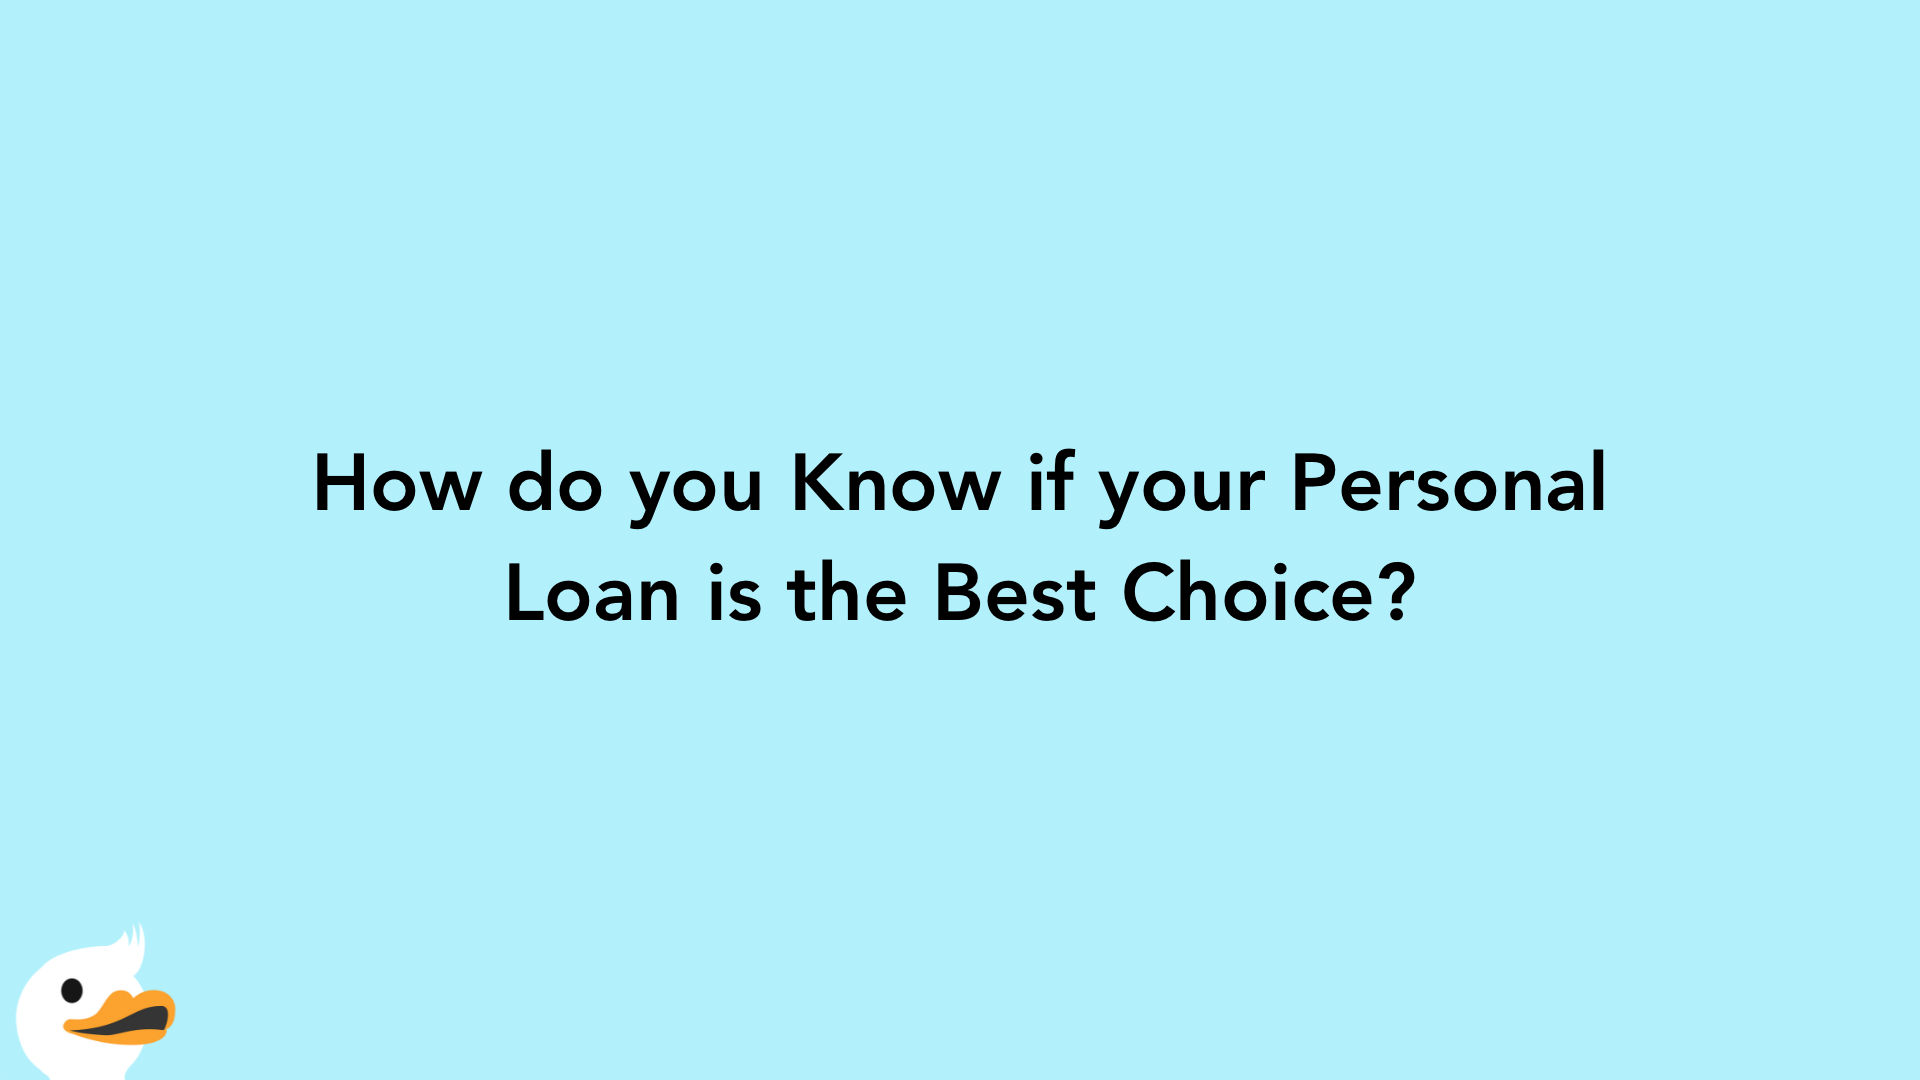 How do you Know if your Personal Loan is the Best Choice?